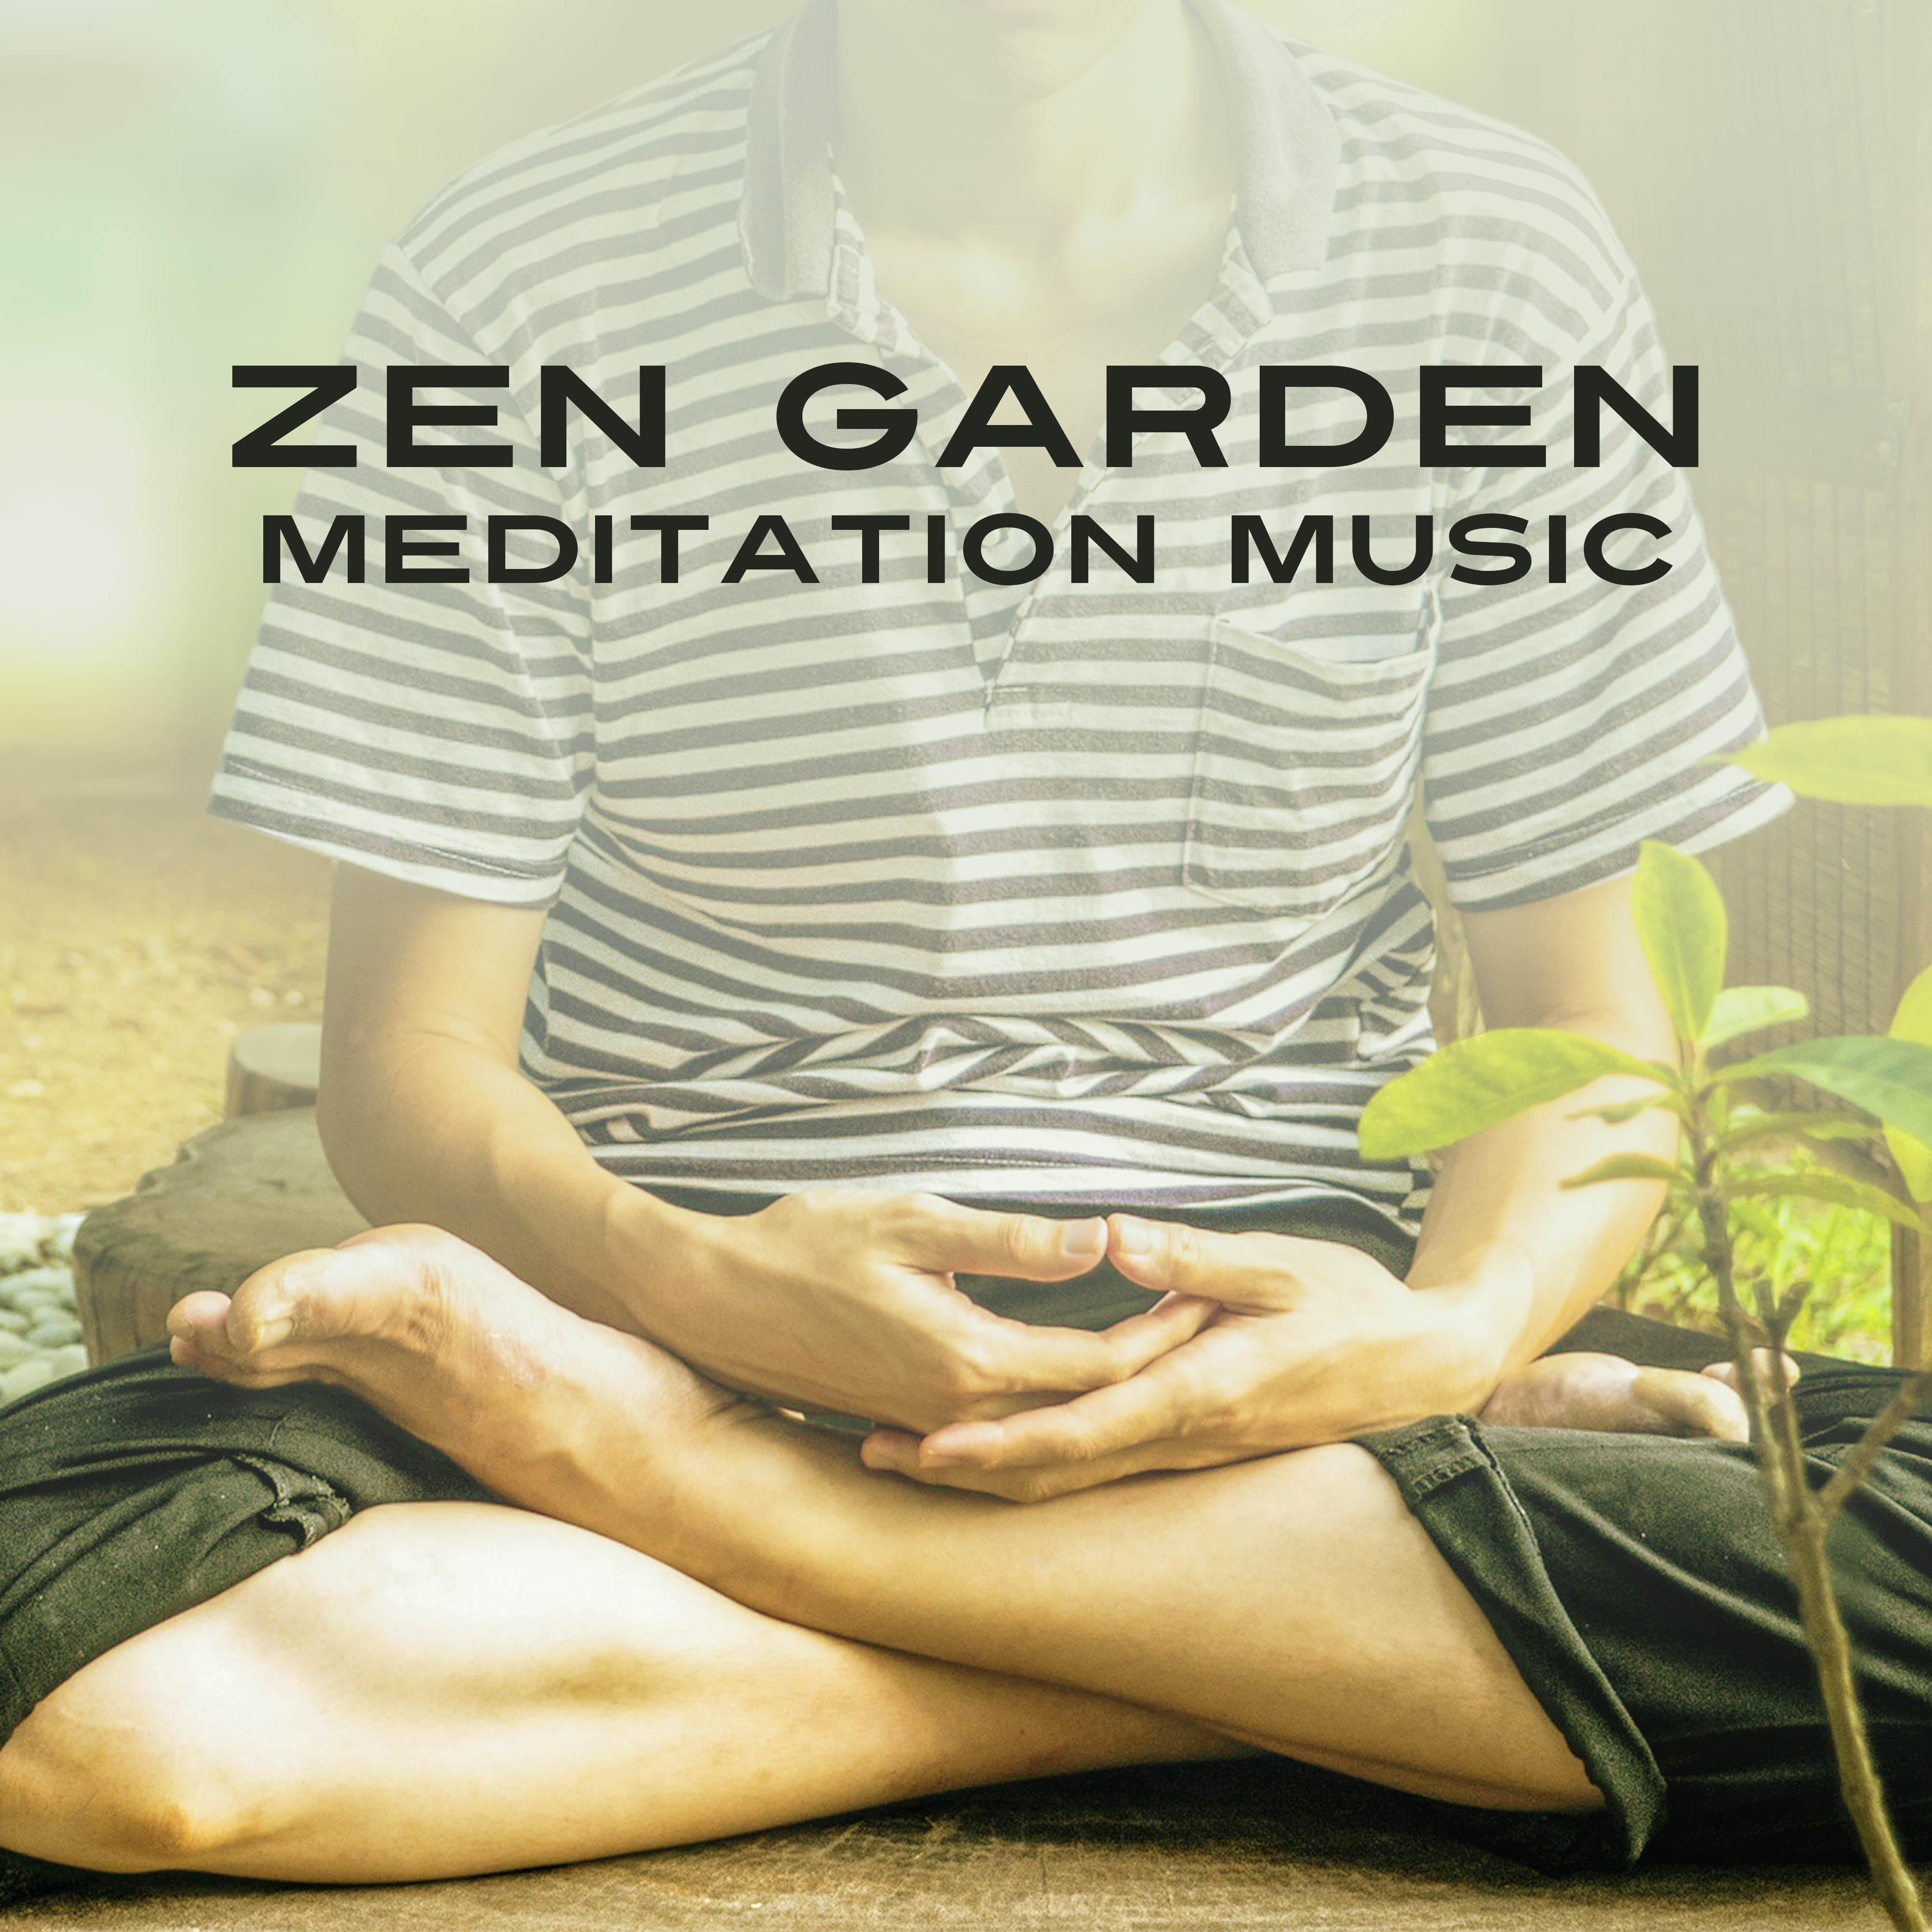 Zen Garden Meditation Music  New Age Songs for Meditate, Healing Relaxation Music, Yoga on the Morning